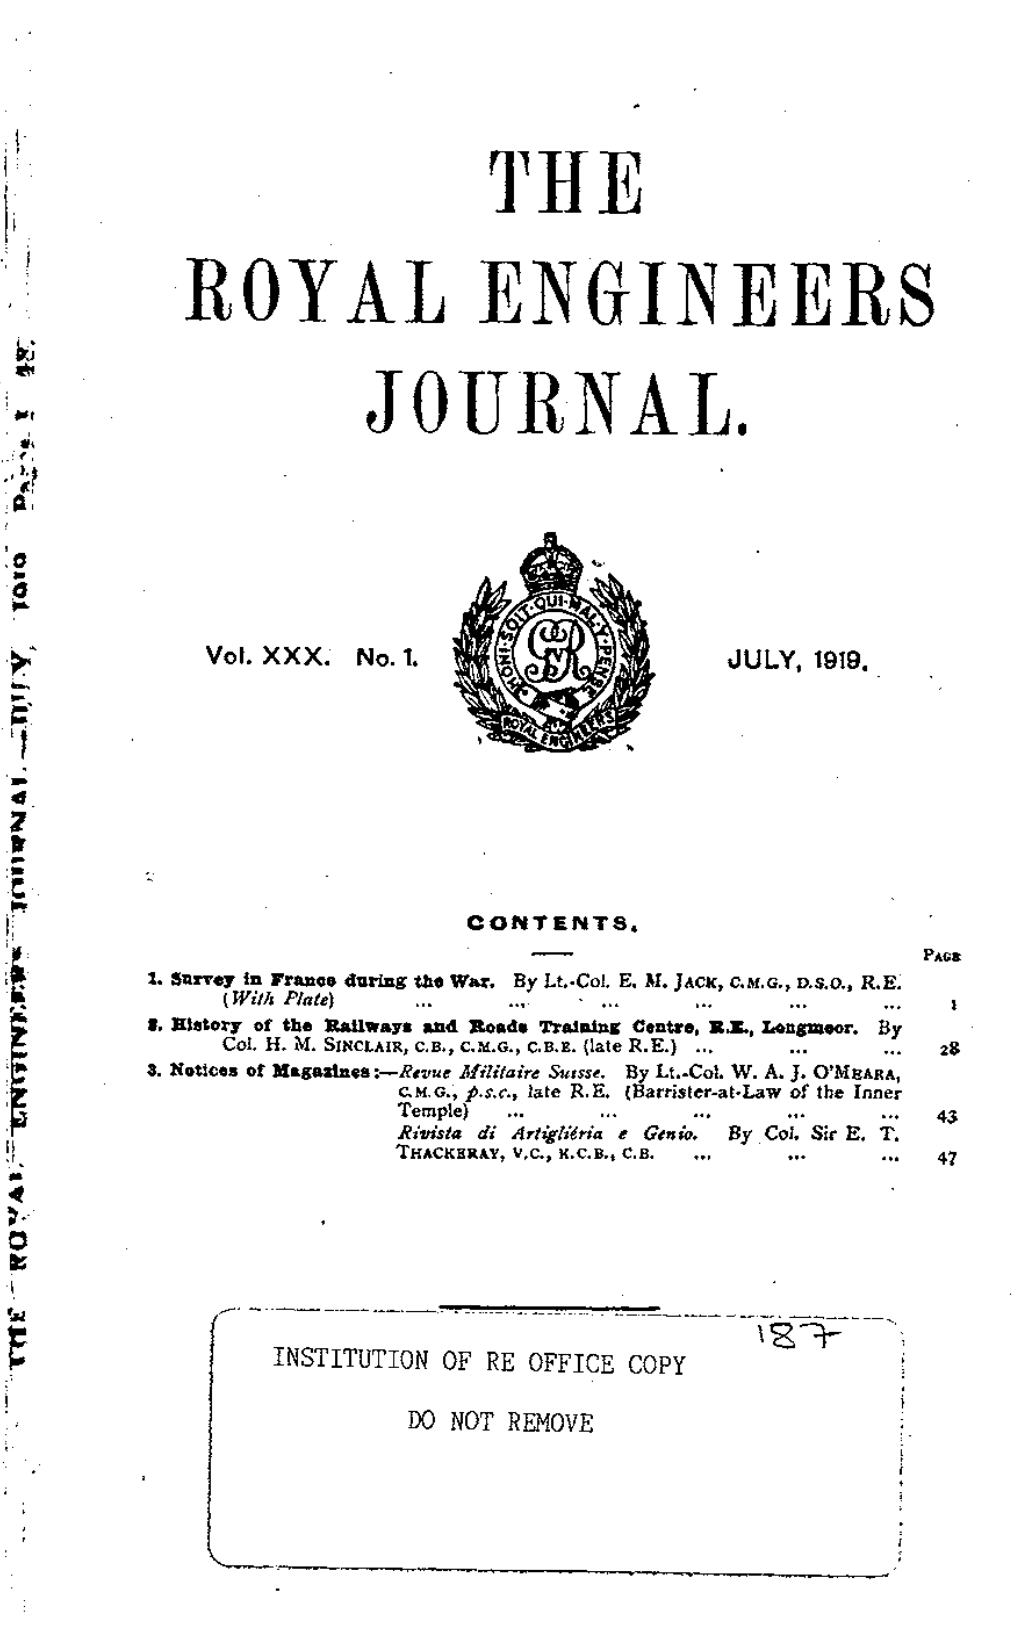 The Royal Engineers Journal